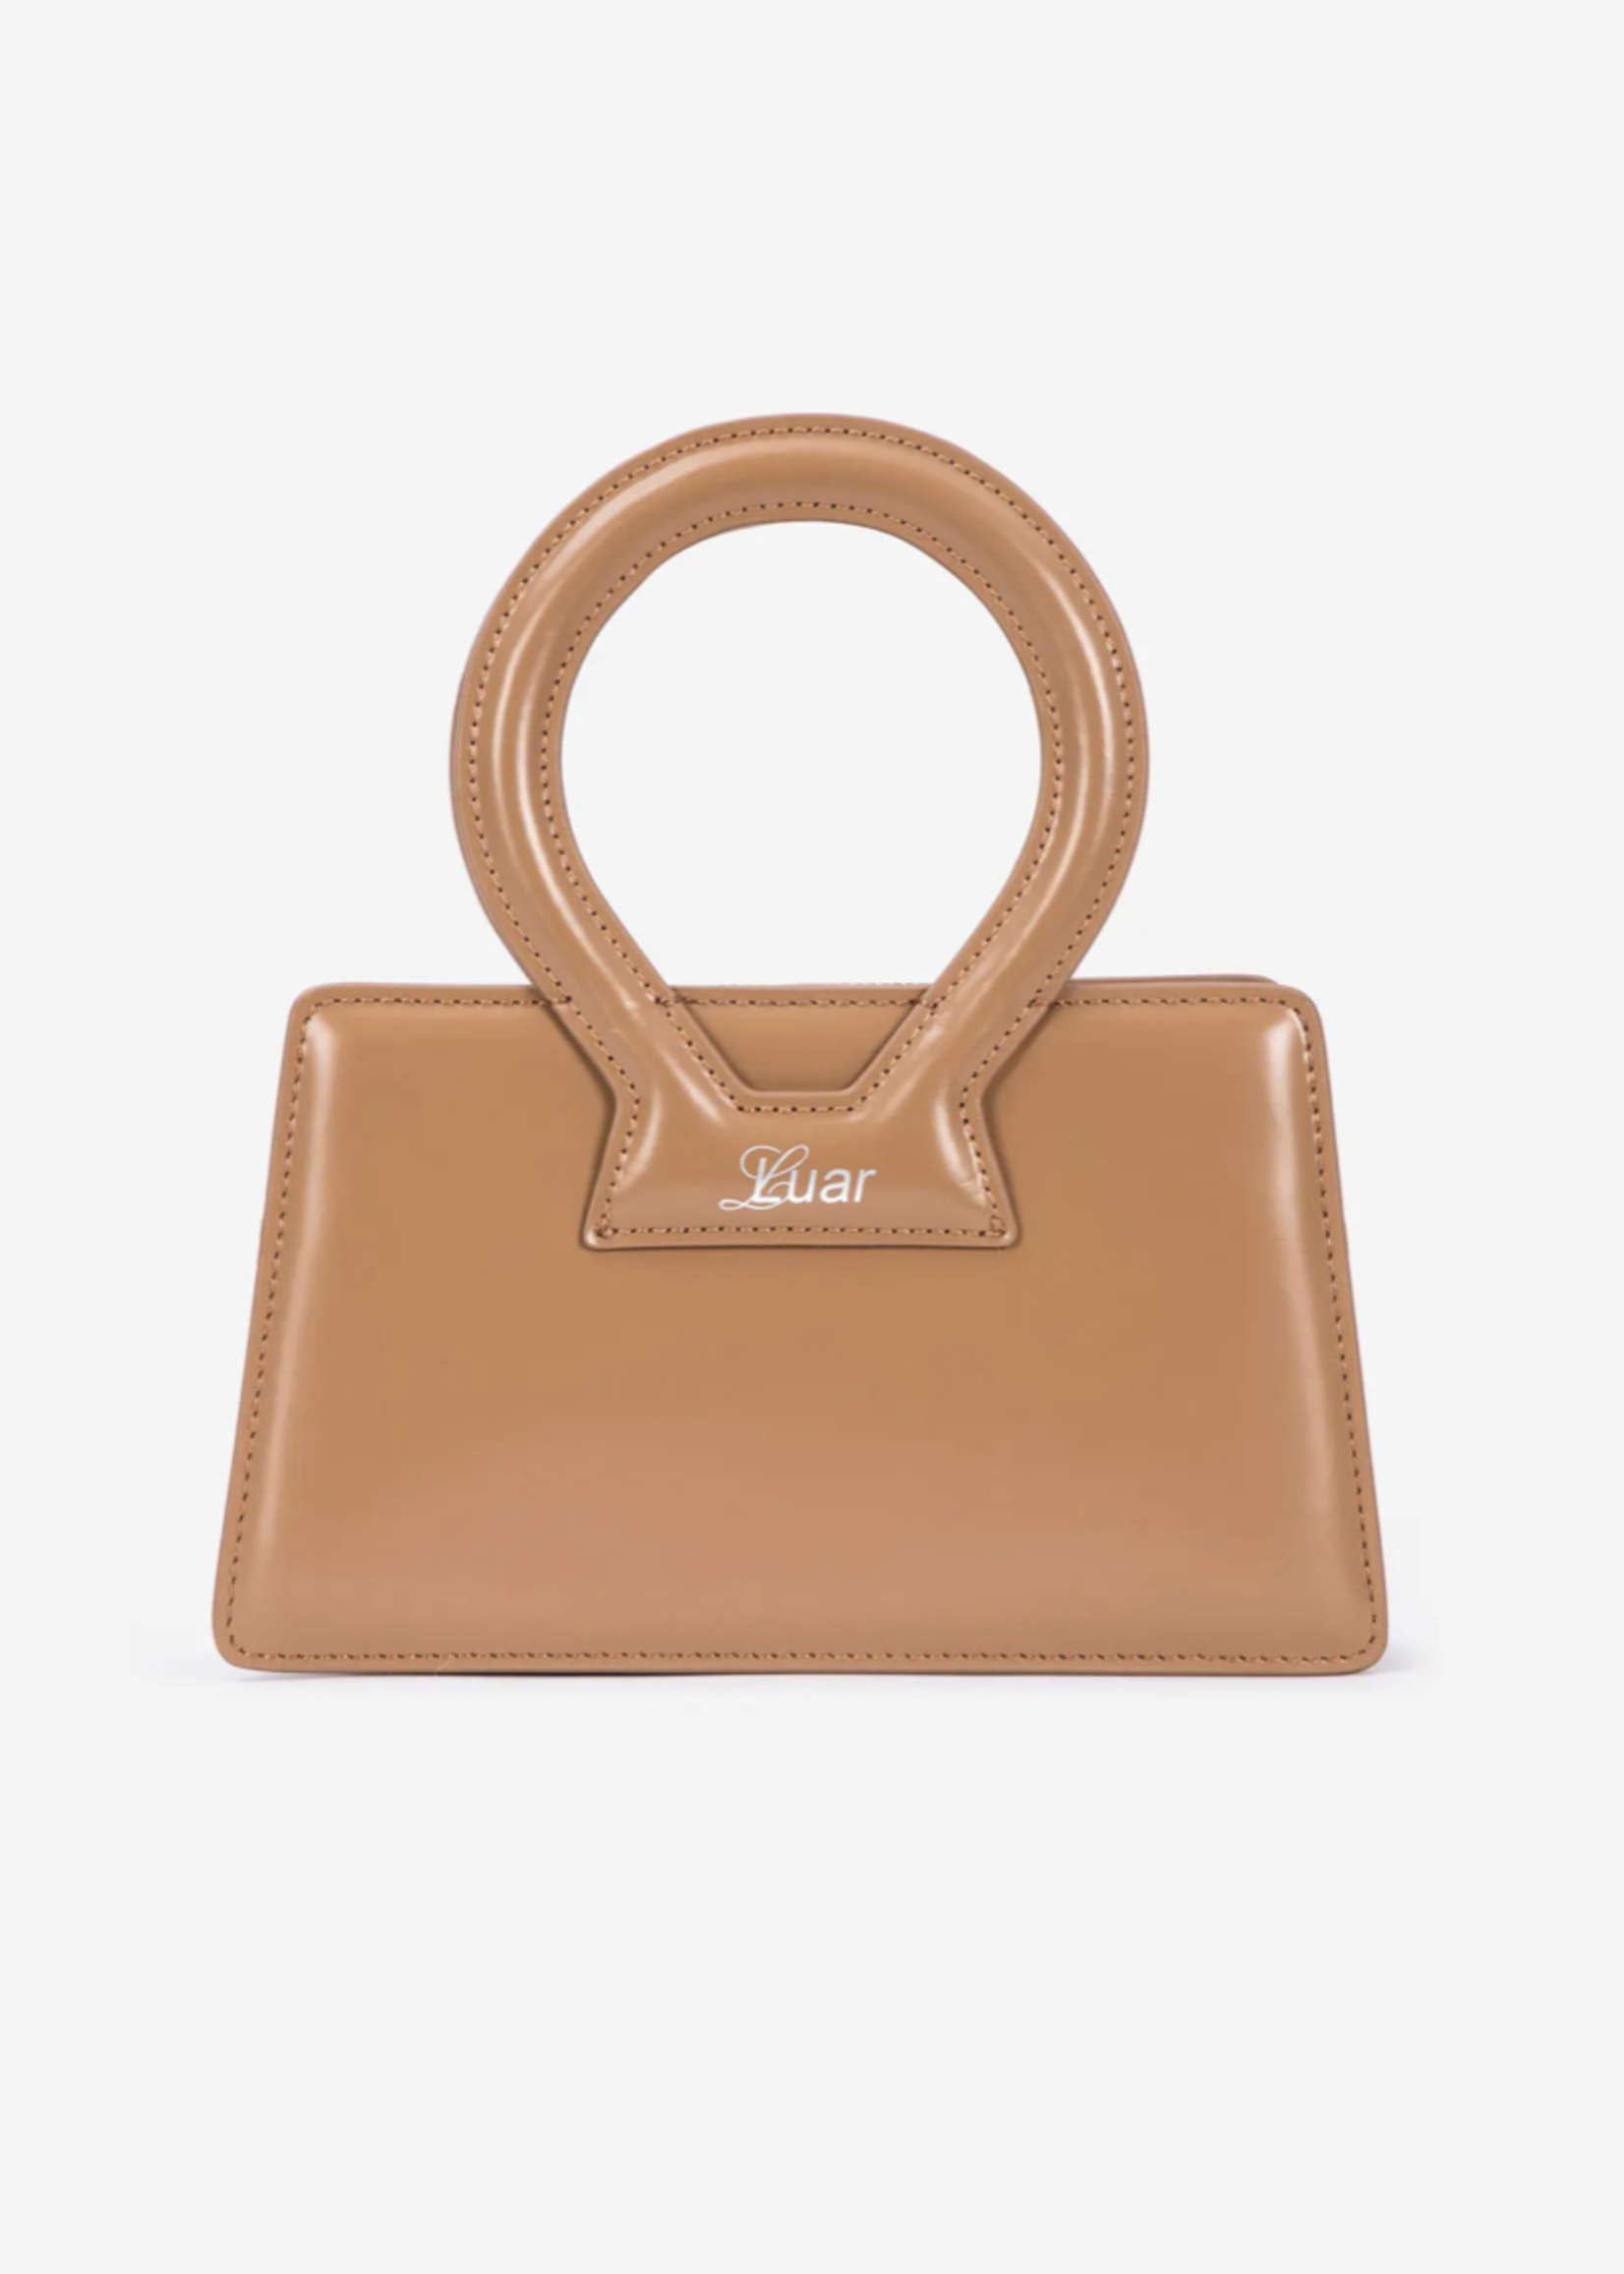 LUAR Small Ana Bag in Tres Leches